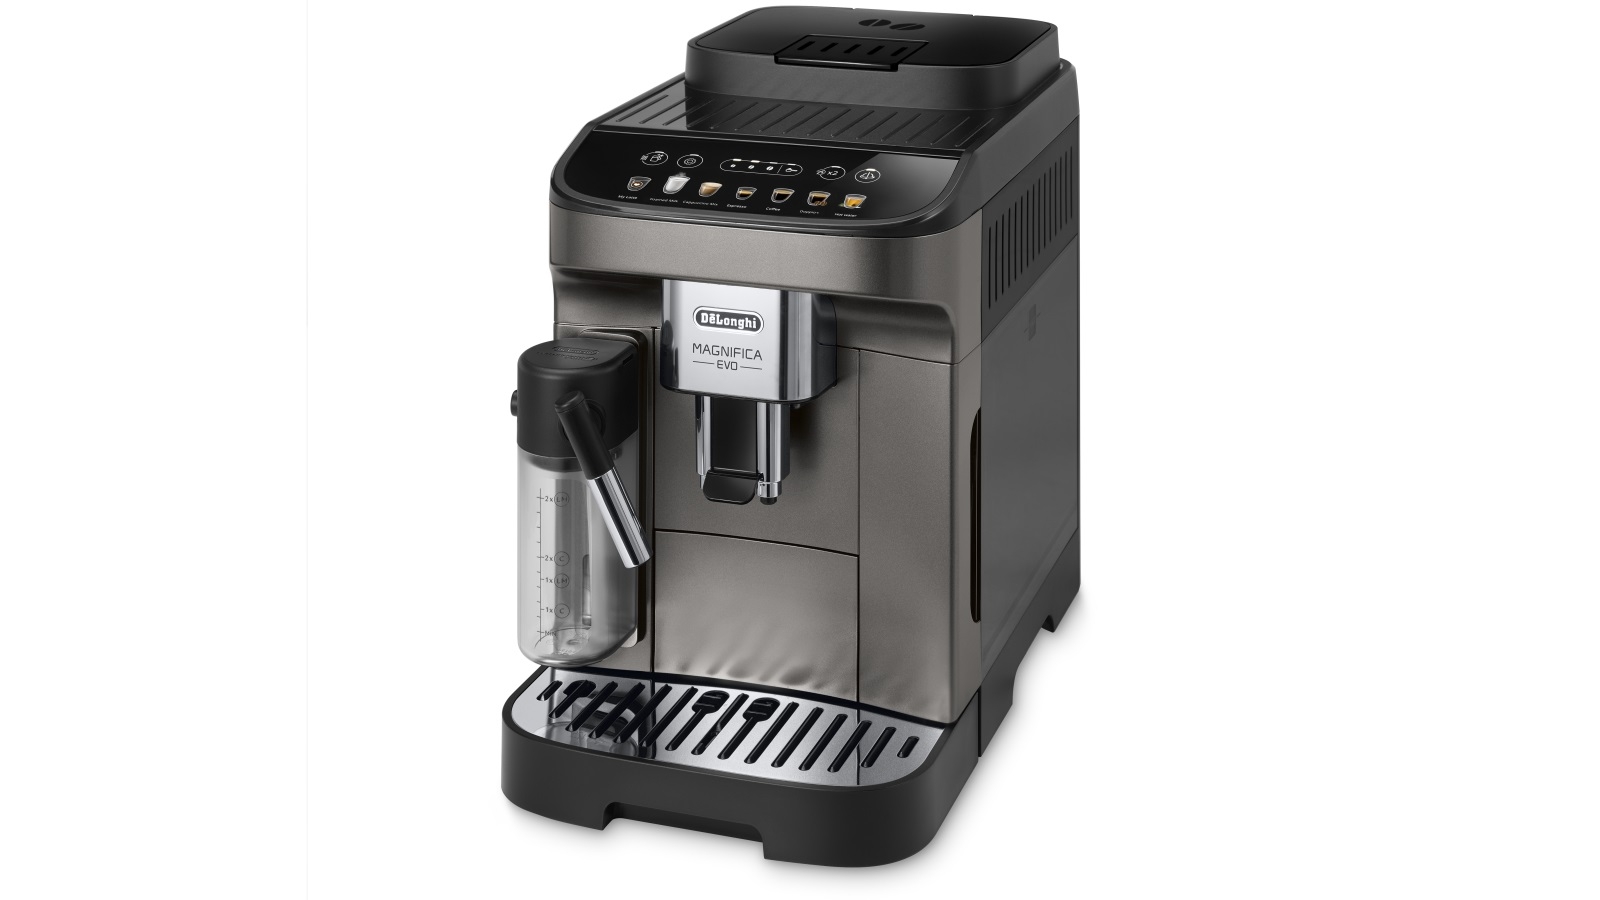 Delonghi Magnifica Evo  How to clean and maintain 